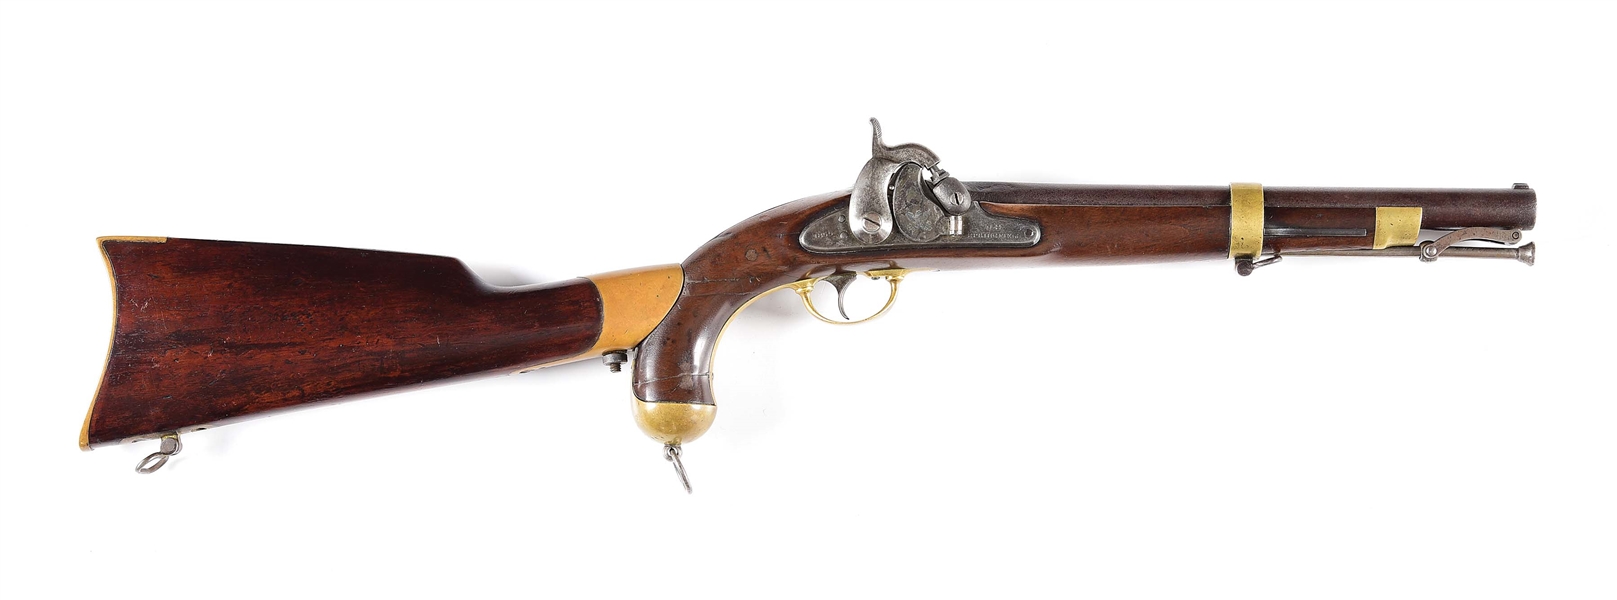 (A) SPRINGFIELD 1855 PERCUSSION PISTOL CARBINE WITH STOCK.